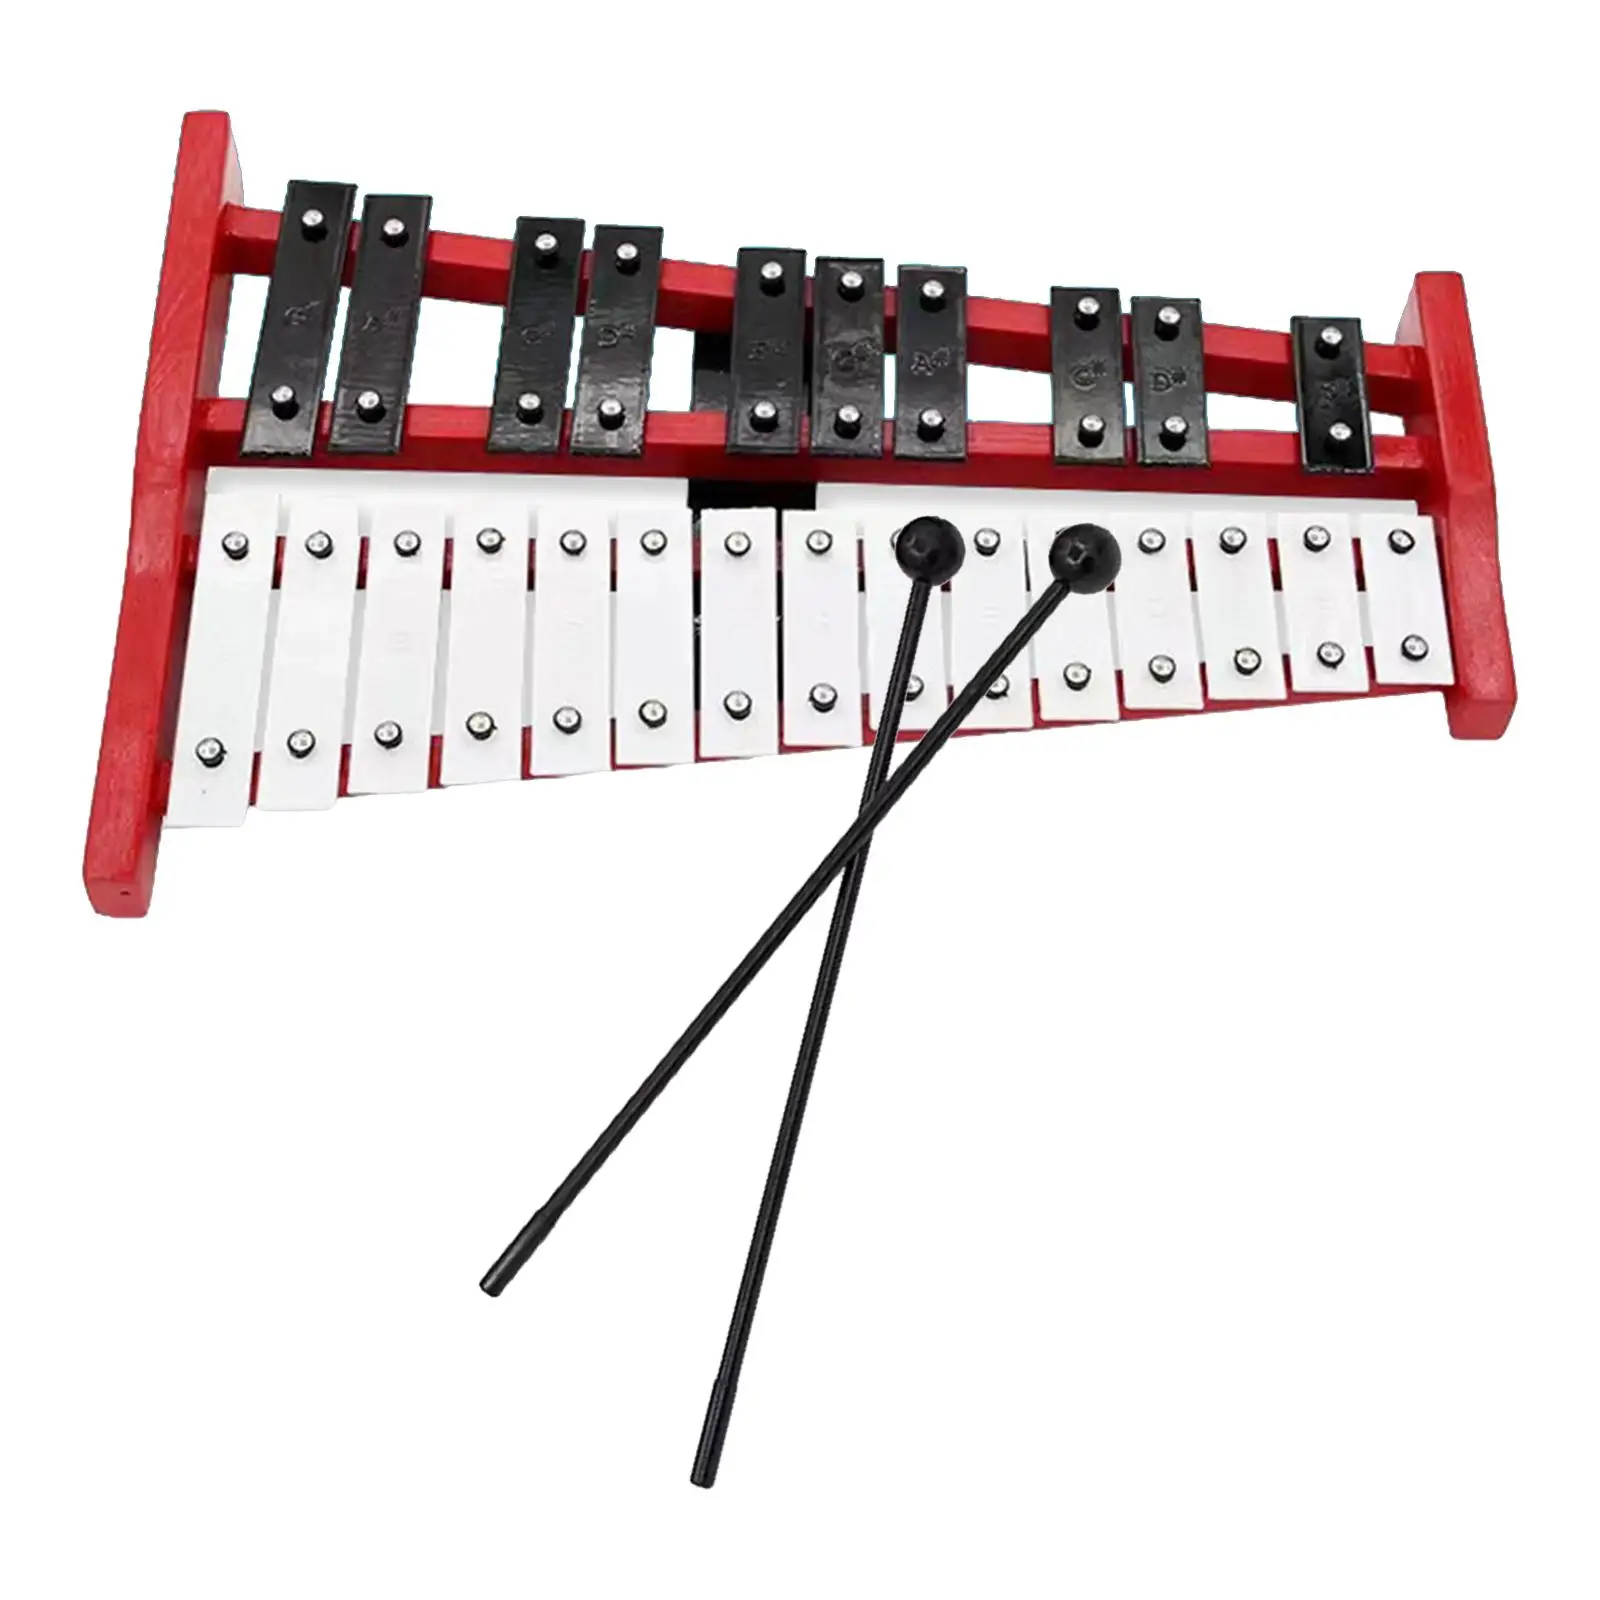 Xylophone for Kids Portable Aluminum Wooden Hand Knock Piano Toy for Live Performance Music Lessons School Orchestras Event Home